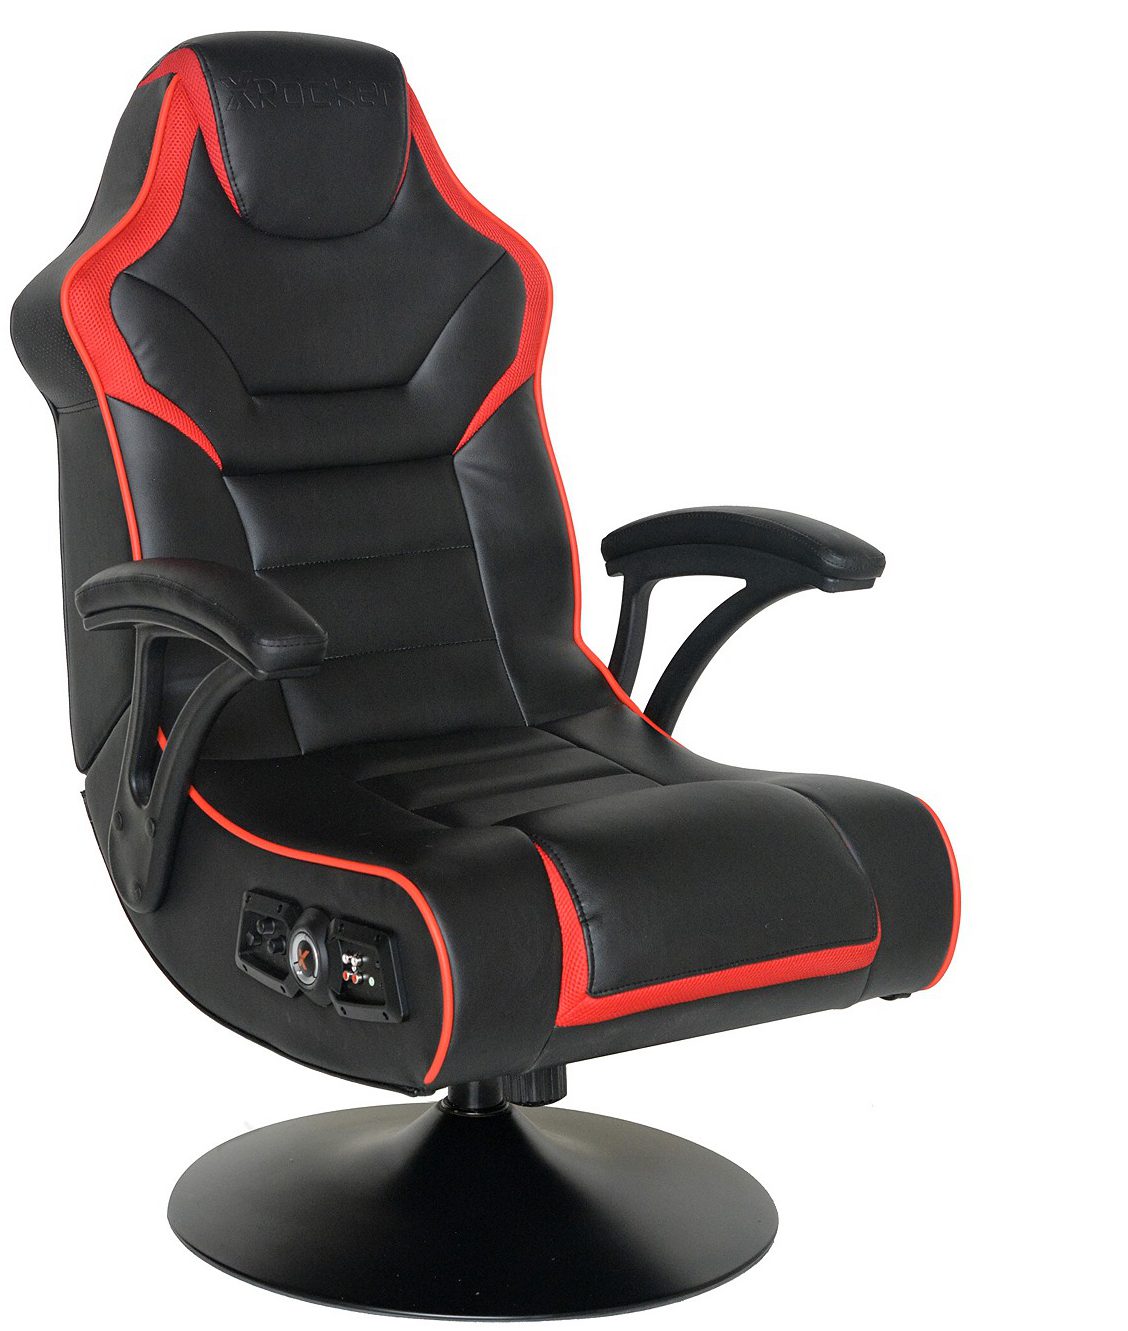 Torque Wireless Gaming Chair